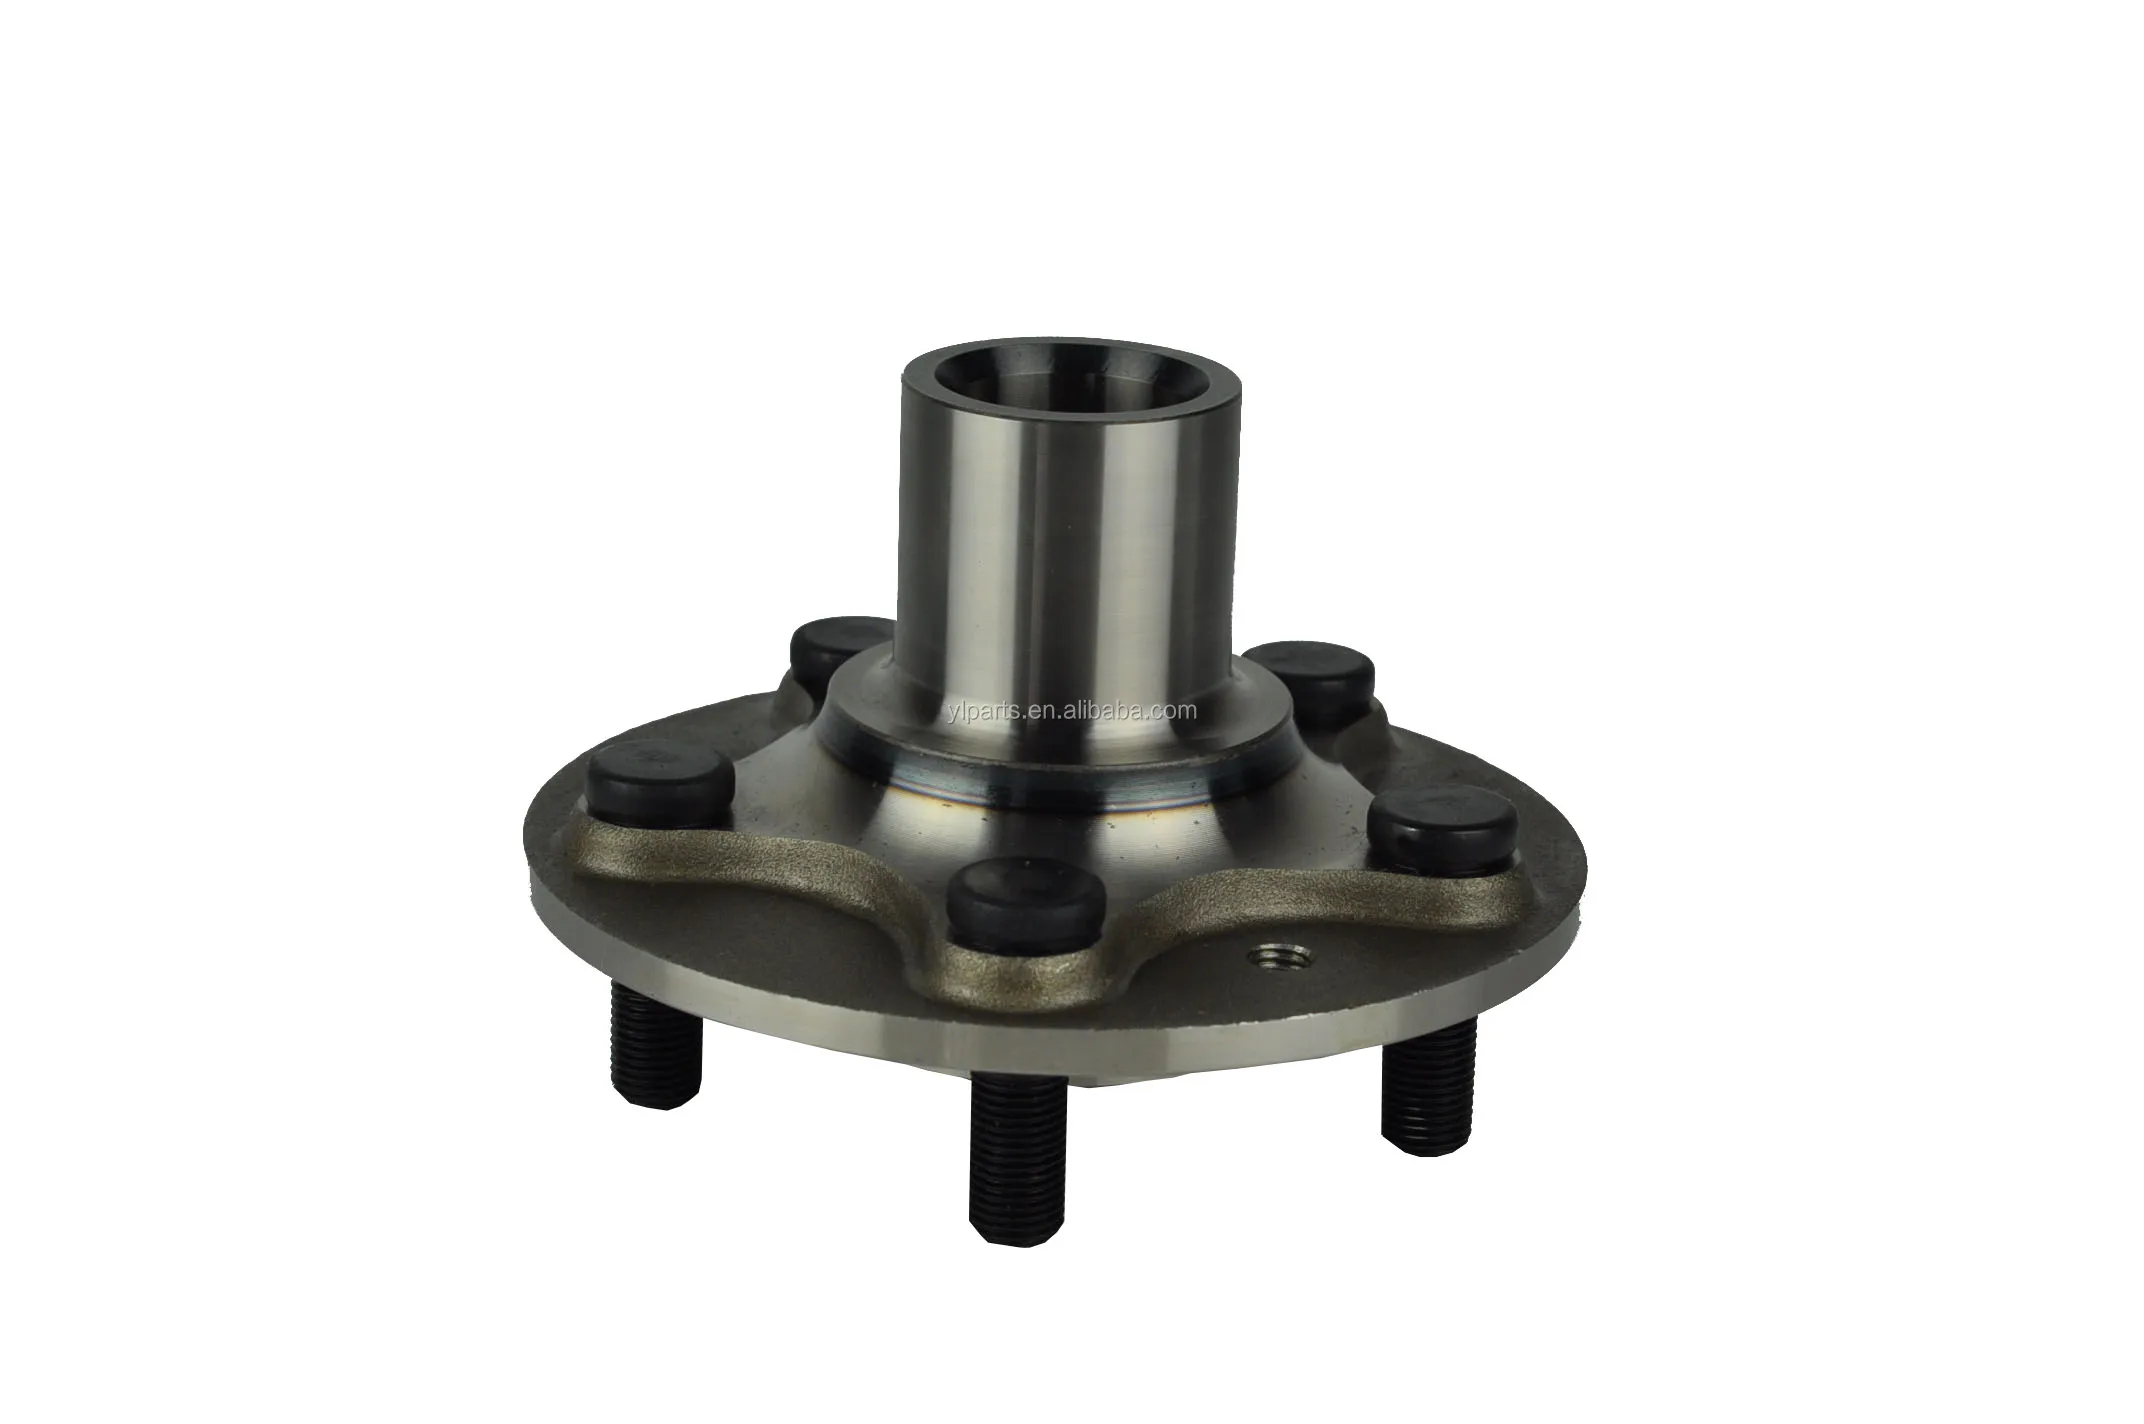 2005-2009 Rear Wheel Hub For Land Rover Discovery Iii